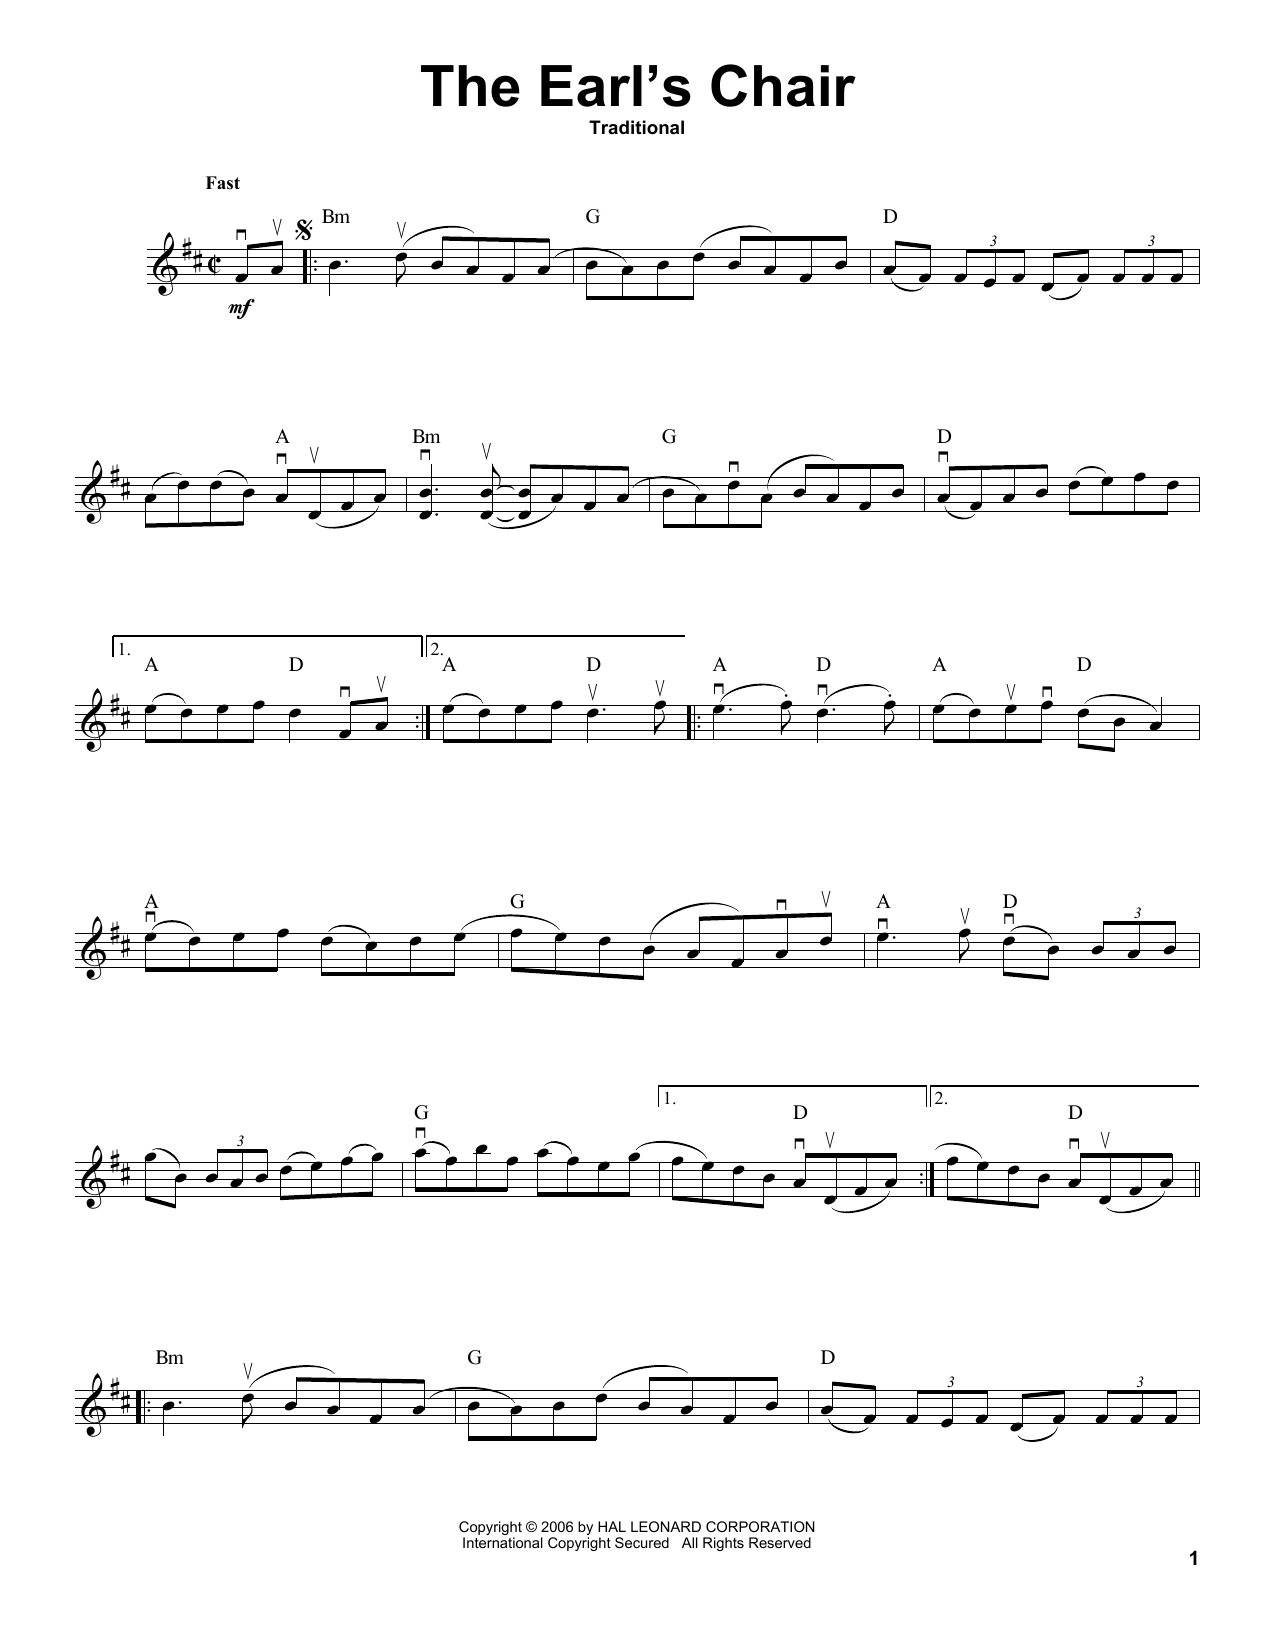 Download Traditional The Earl's Chair Sheet Music